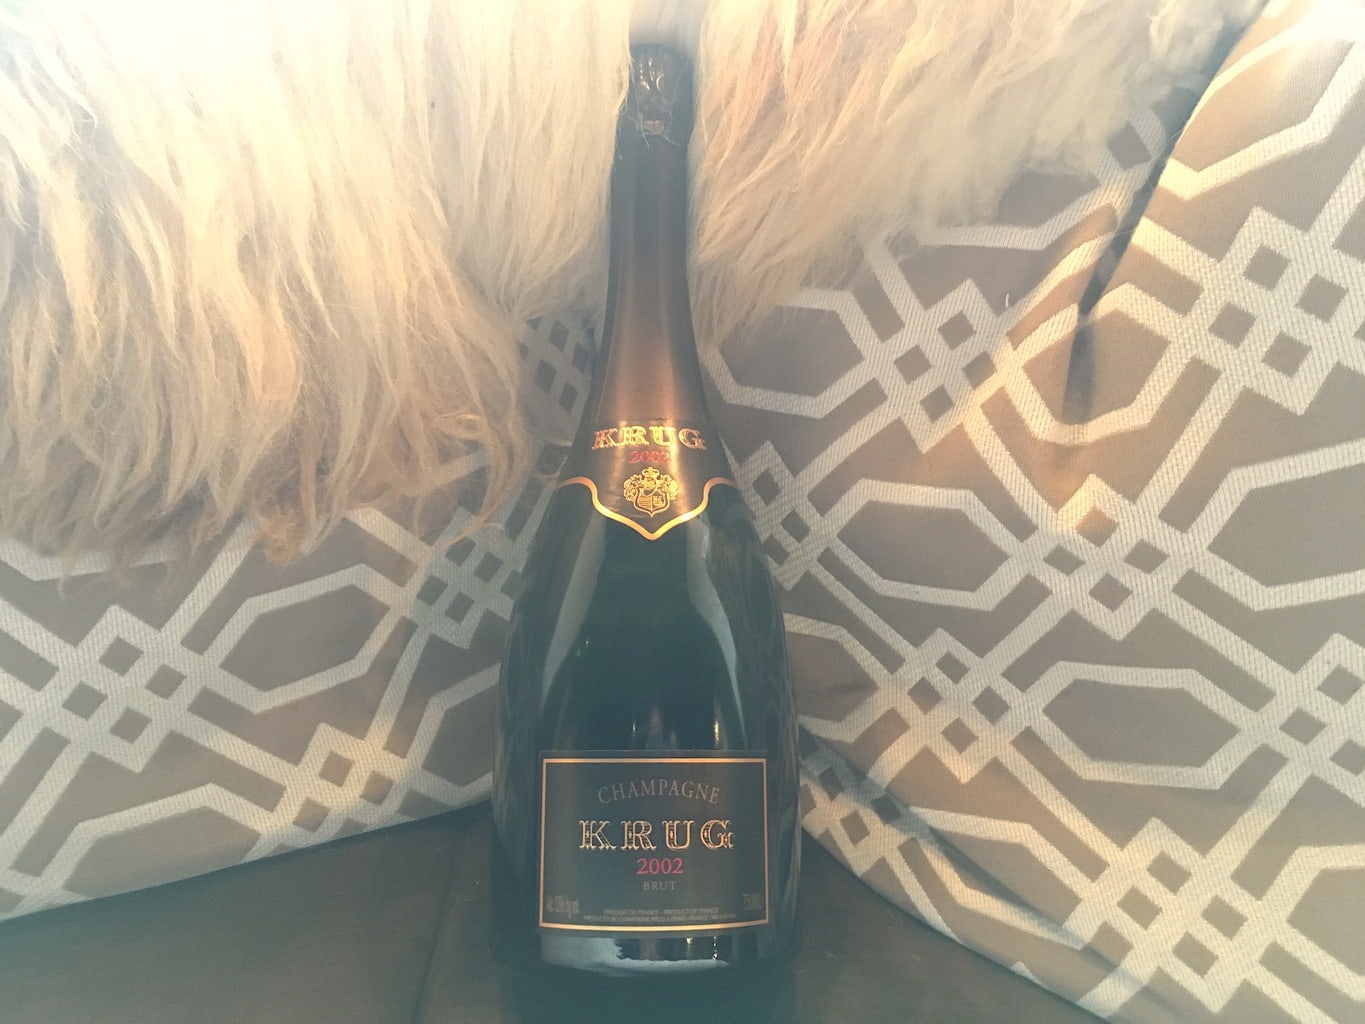 Black Cat Bistro now has bottles of the 2002 vintage of Krug. Gorgeous champagne.